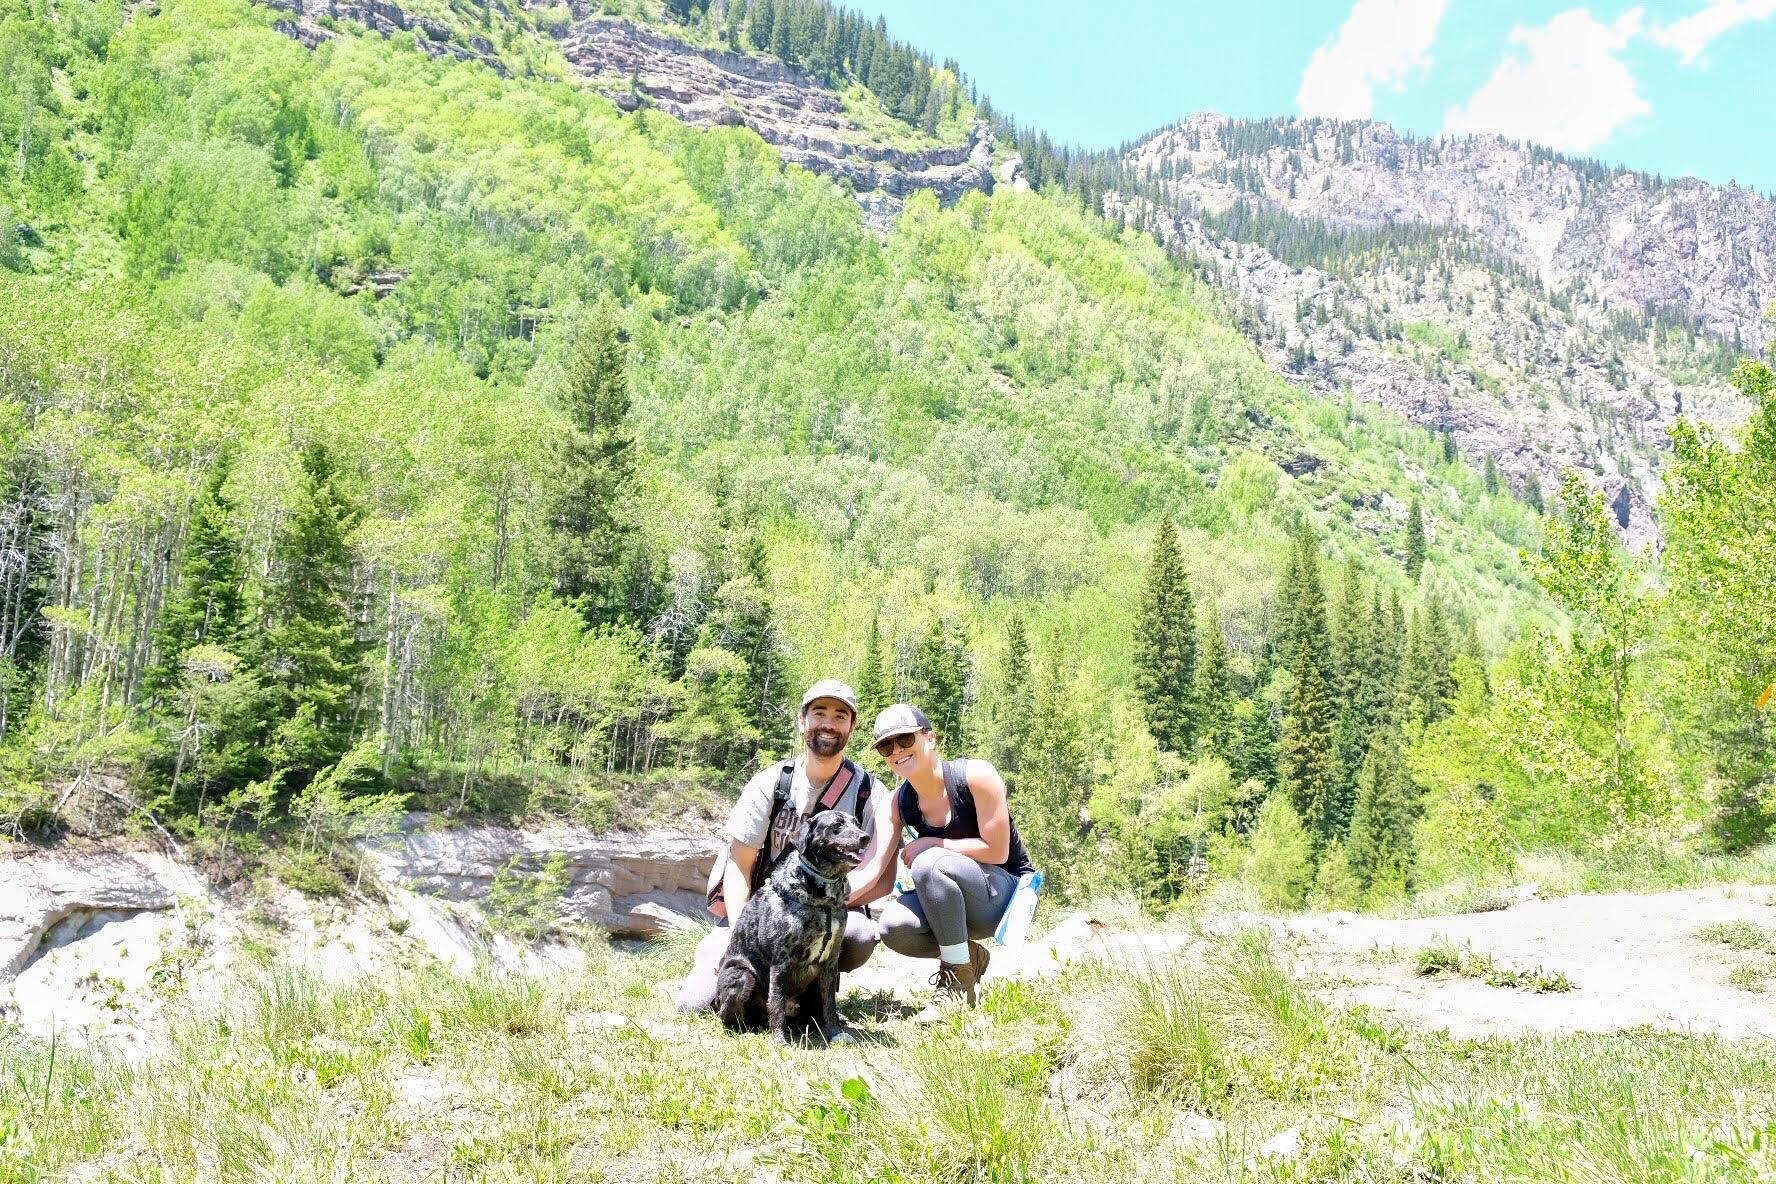 Hiking together in Colorado with Judah.